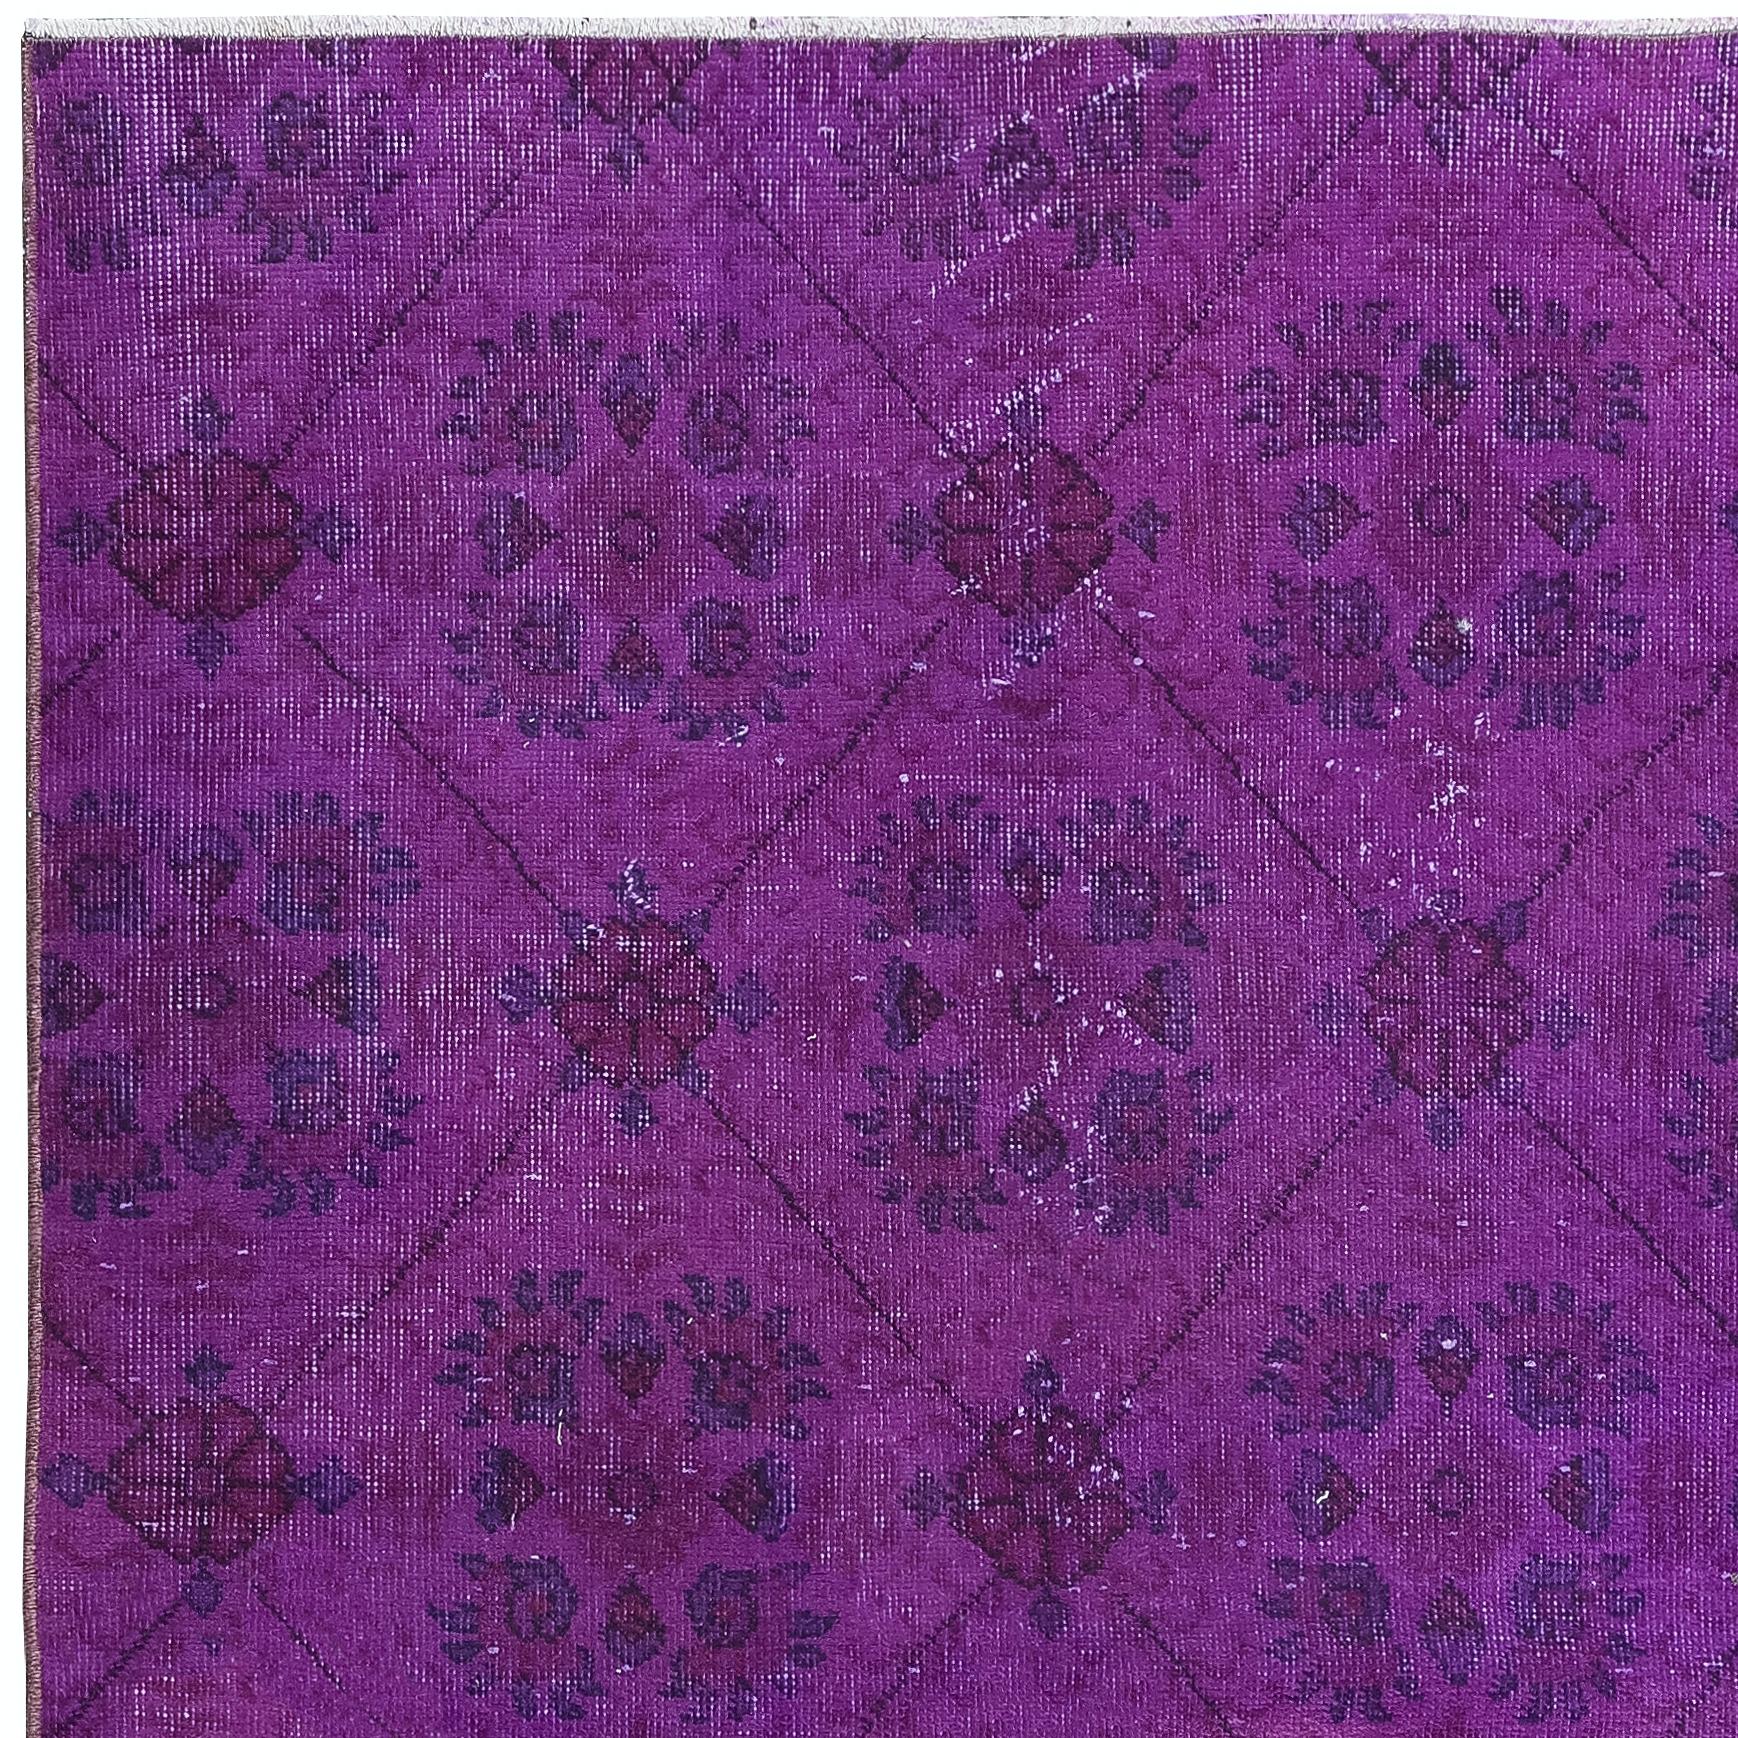 Turkish 3.6x6.4 Ft Hand Knotted Accent Rug, Purple Floral Design Carpet from Turkey For Sale